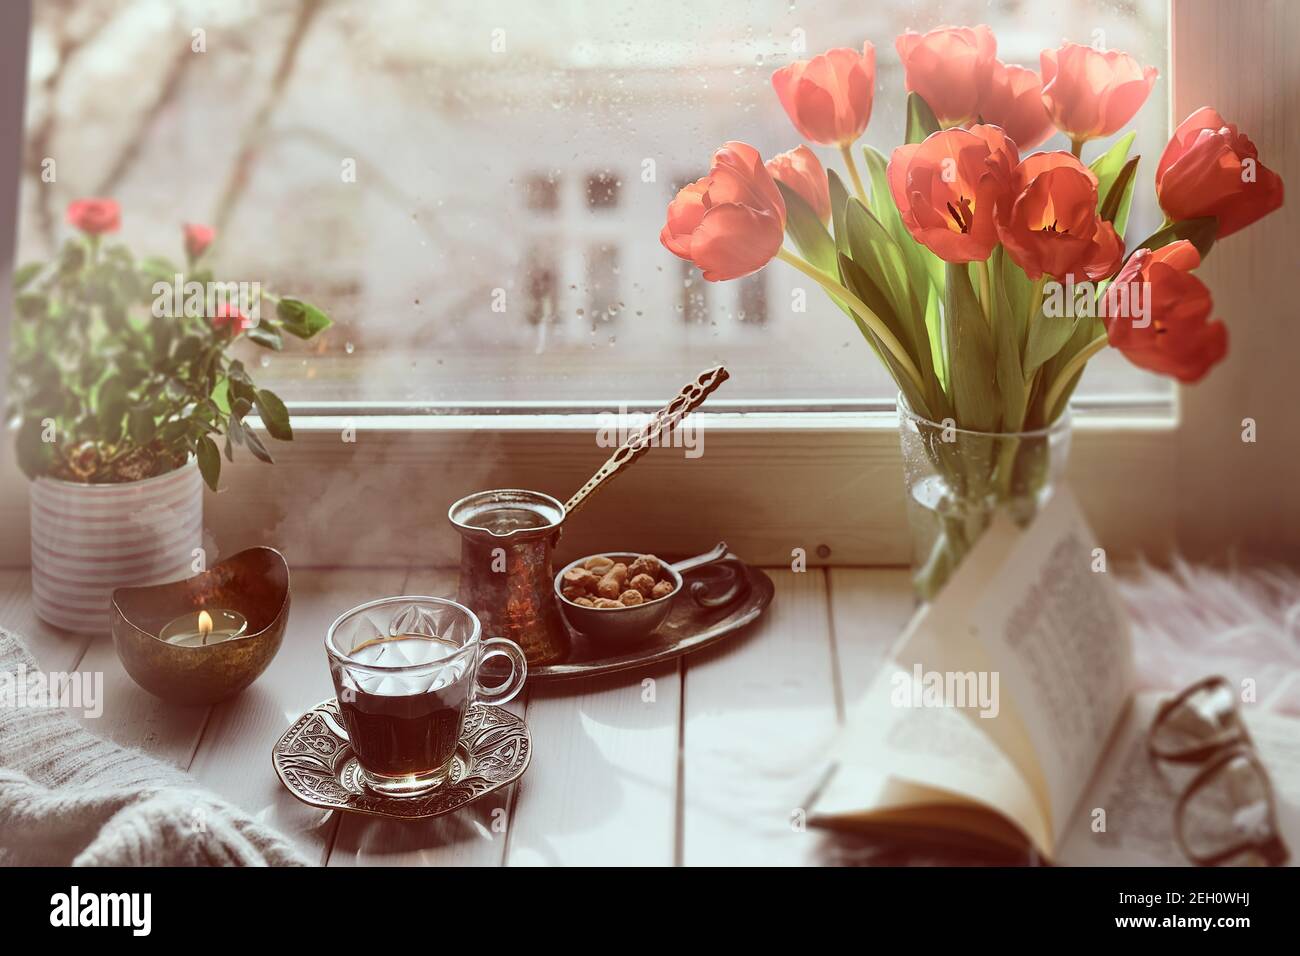 Oriental coffee in traditional Turkish copper coffee pot with flowers on window sill. Rustic wooden window sill with bunch of tulips book. Cold rainy Stock Photo